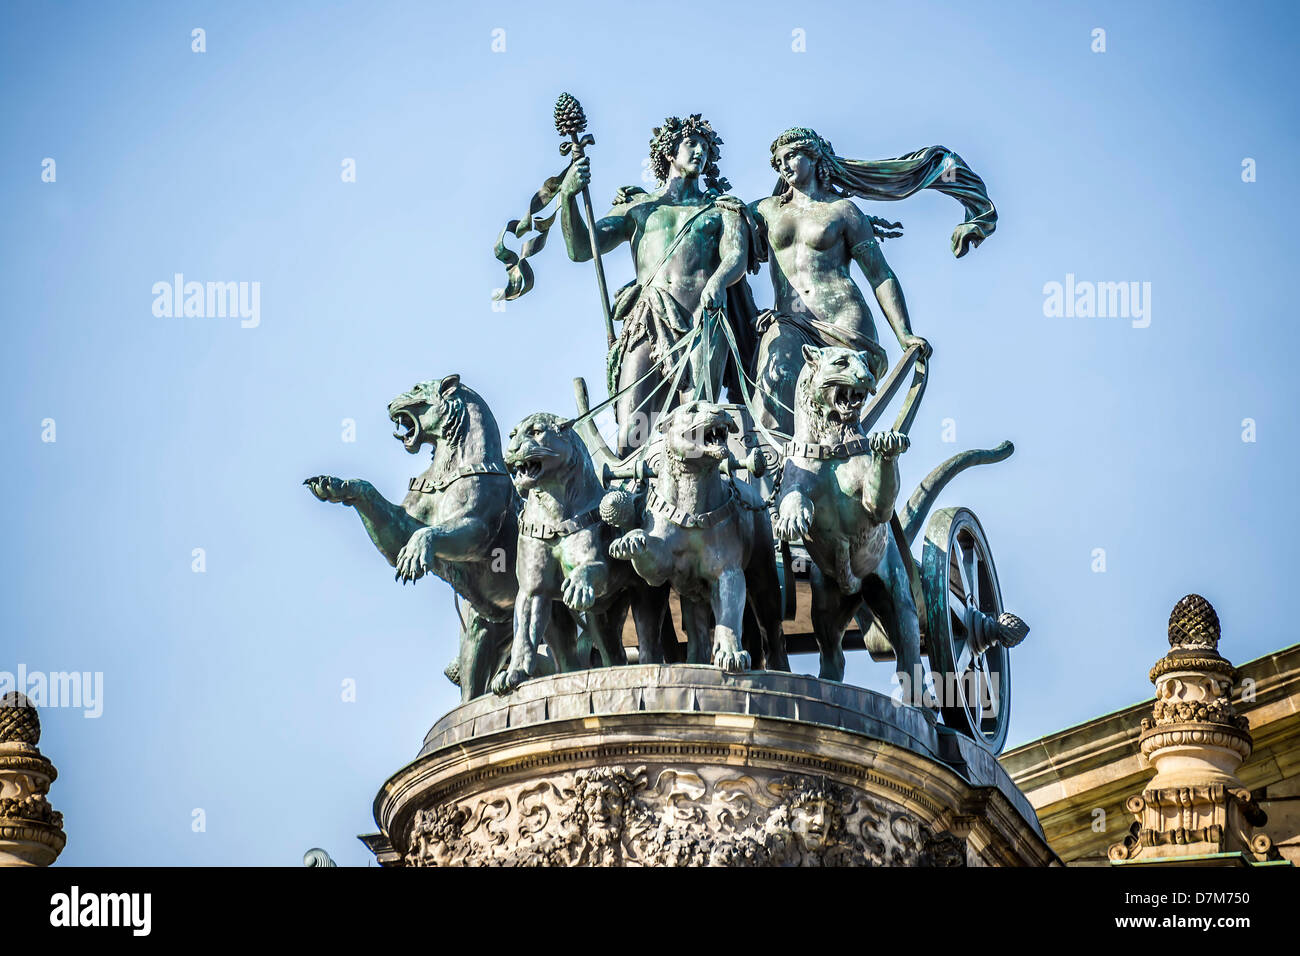 Statue on the top of the opera house in Dresden, Germany Stock Photo